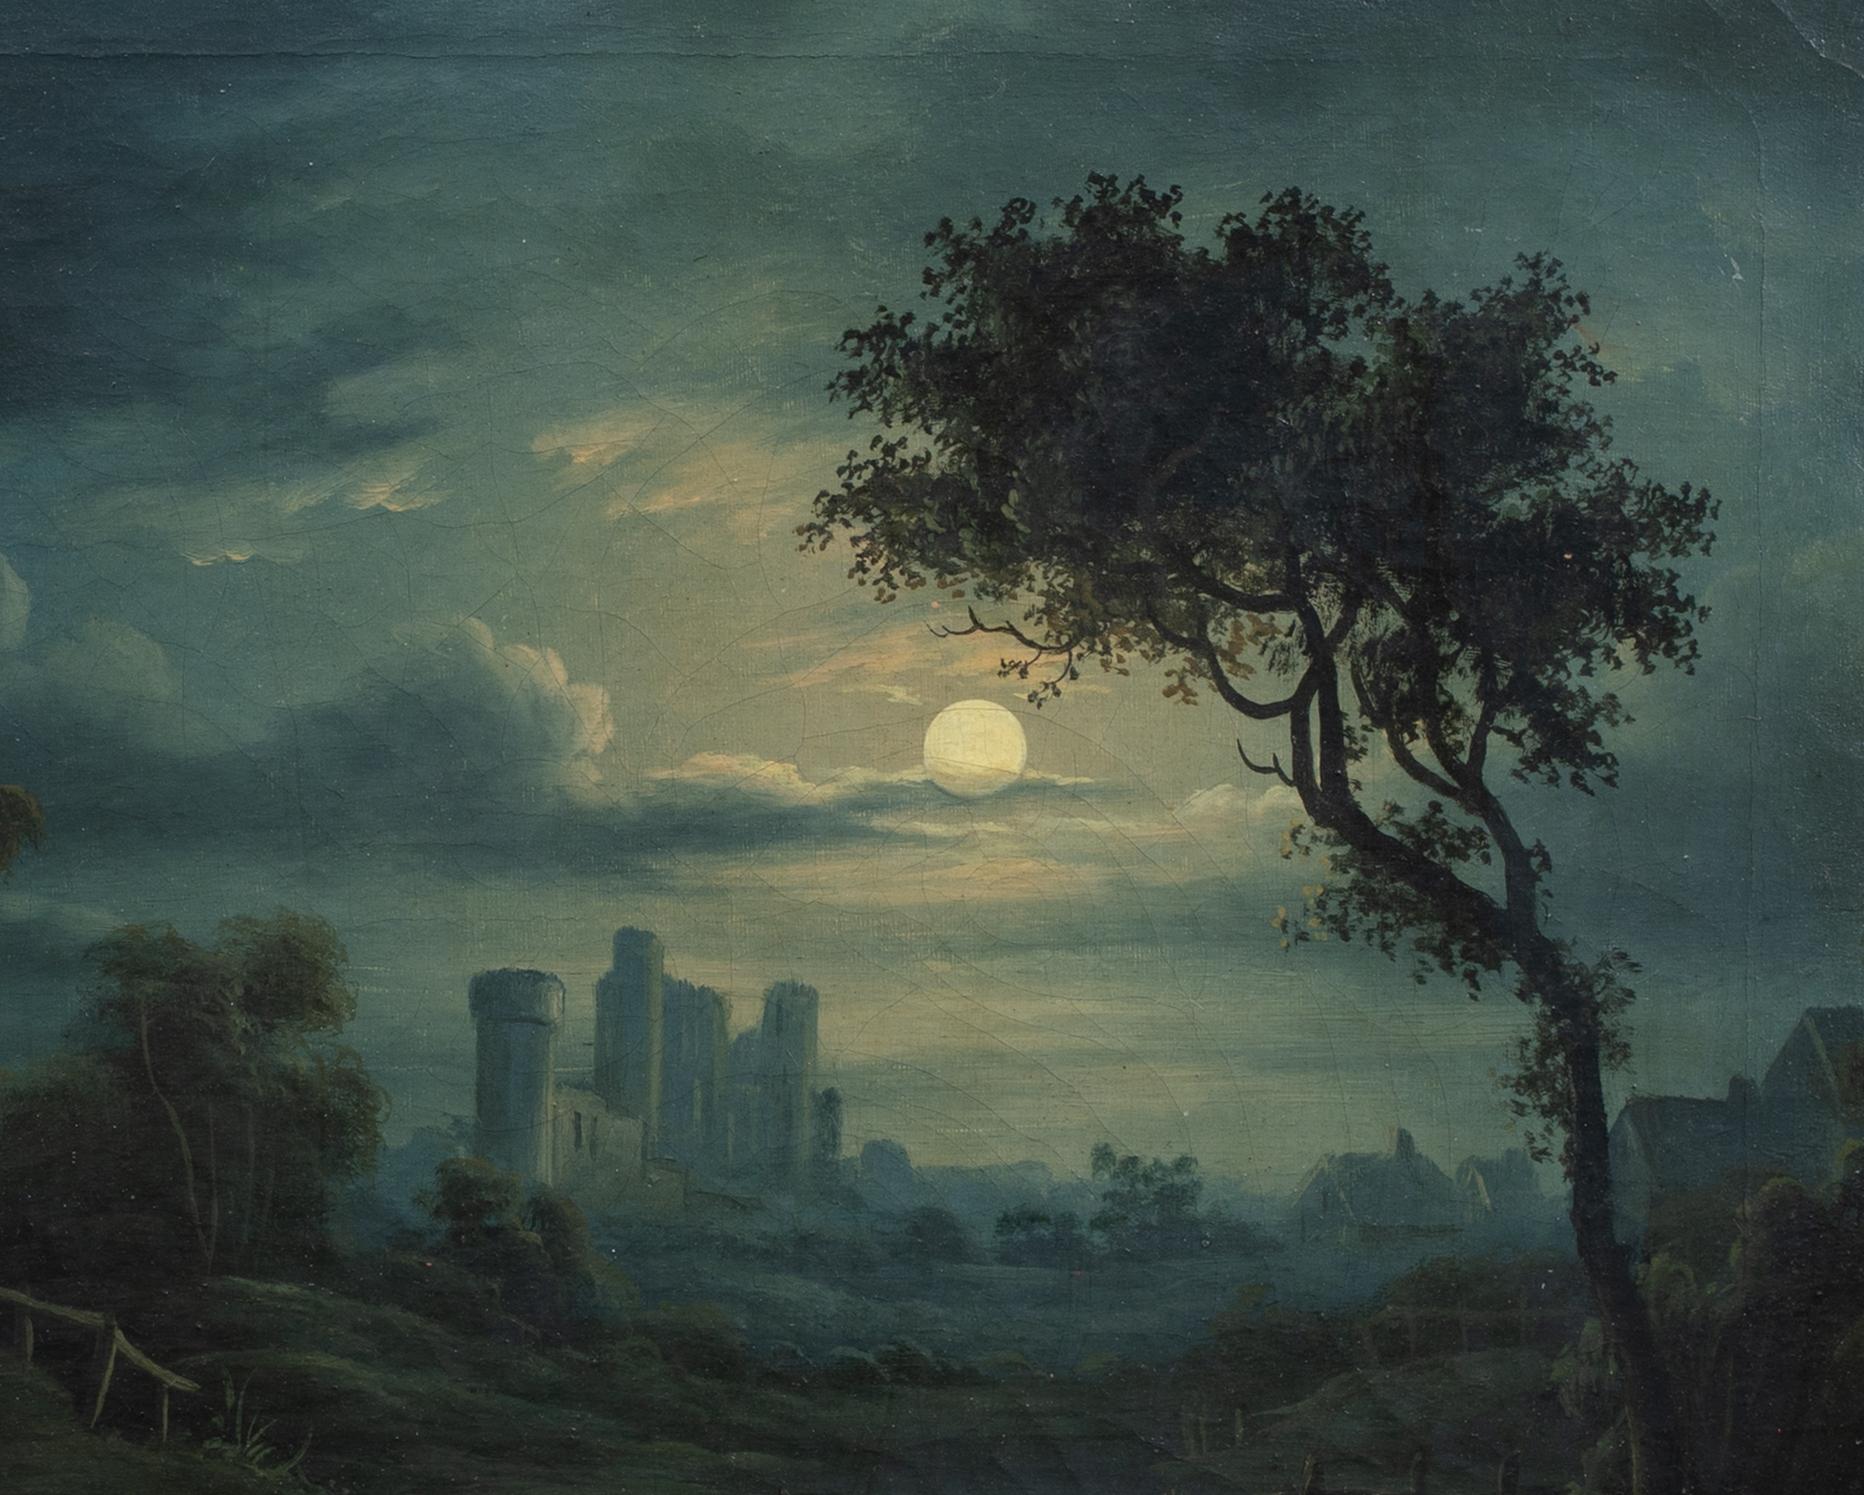 Moonlit River Landscape, 19th Century

Circle of Sebastian PETHER (1790-1844)

19th Century English norturne of a moonlit river landscape with the ruins of a castle in the distance, oil on canvas. Excellent quality and condition extensive view of